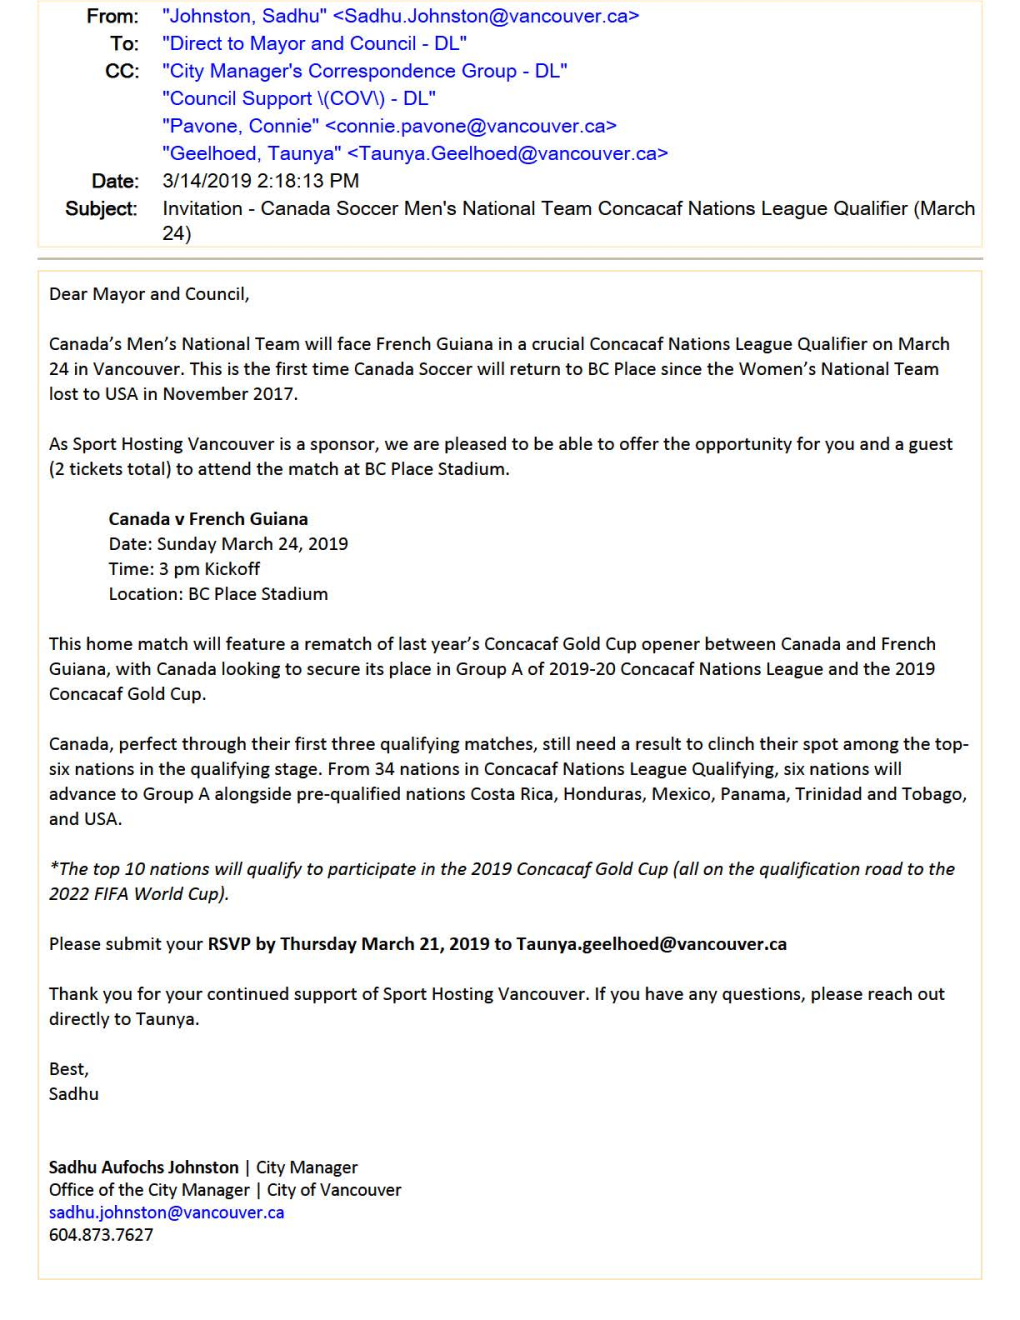 Invitation - Canada Soccer Men's National Team Concacaf Nations League Qualifier (March 24)